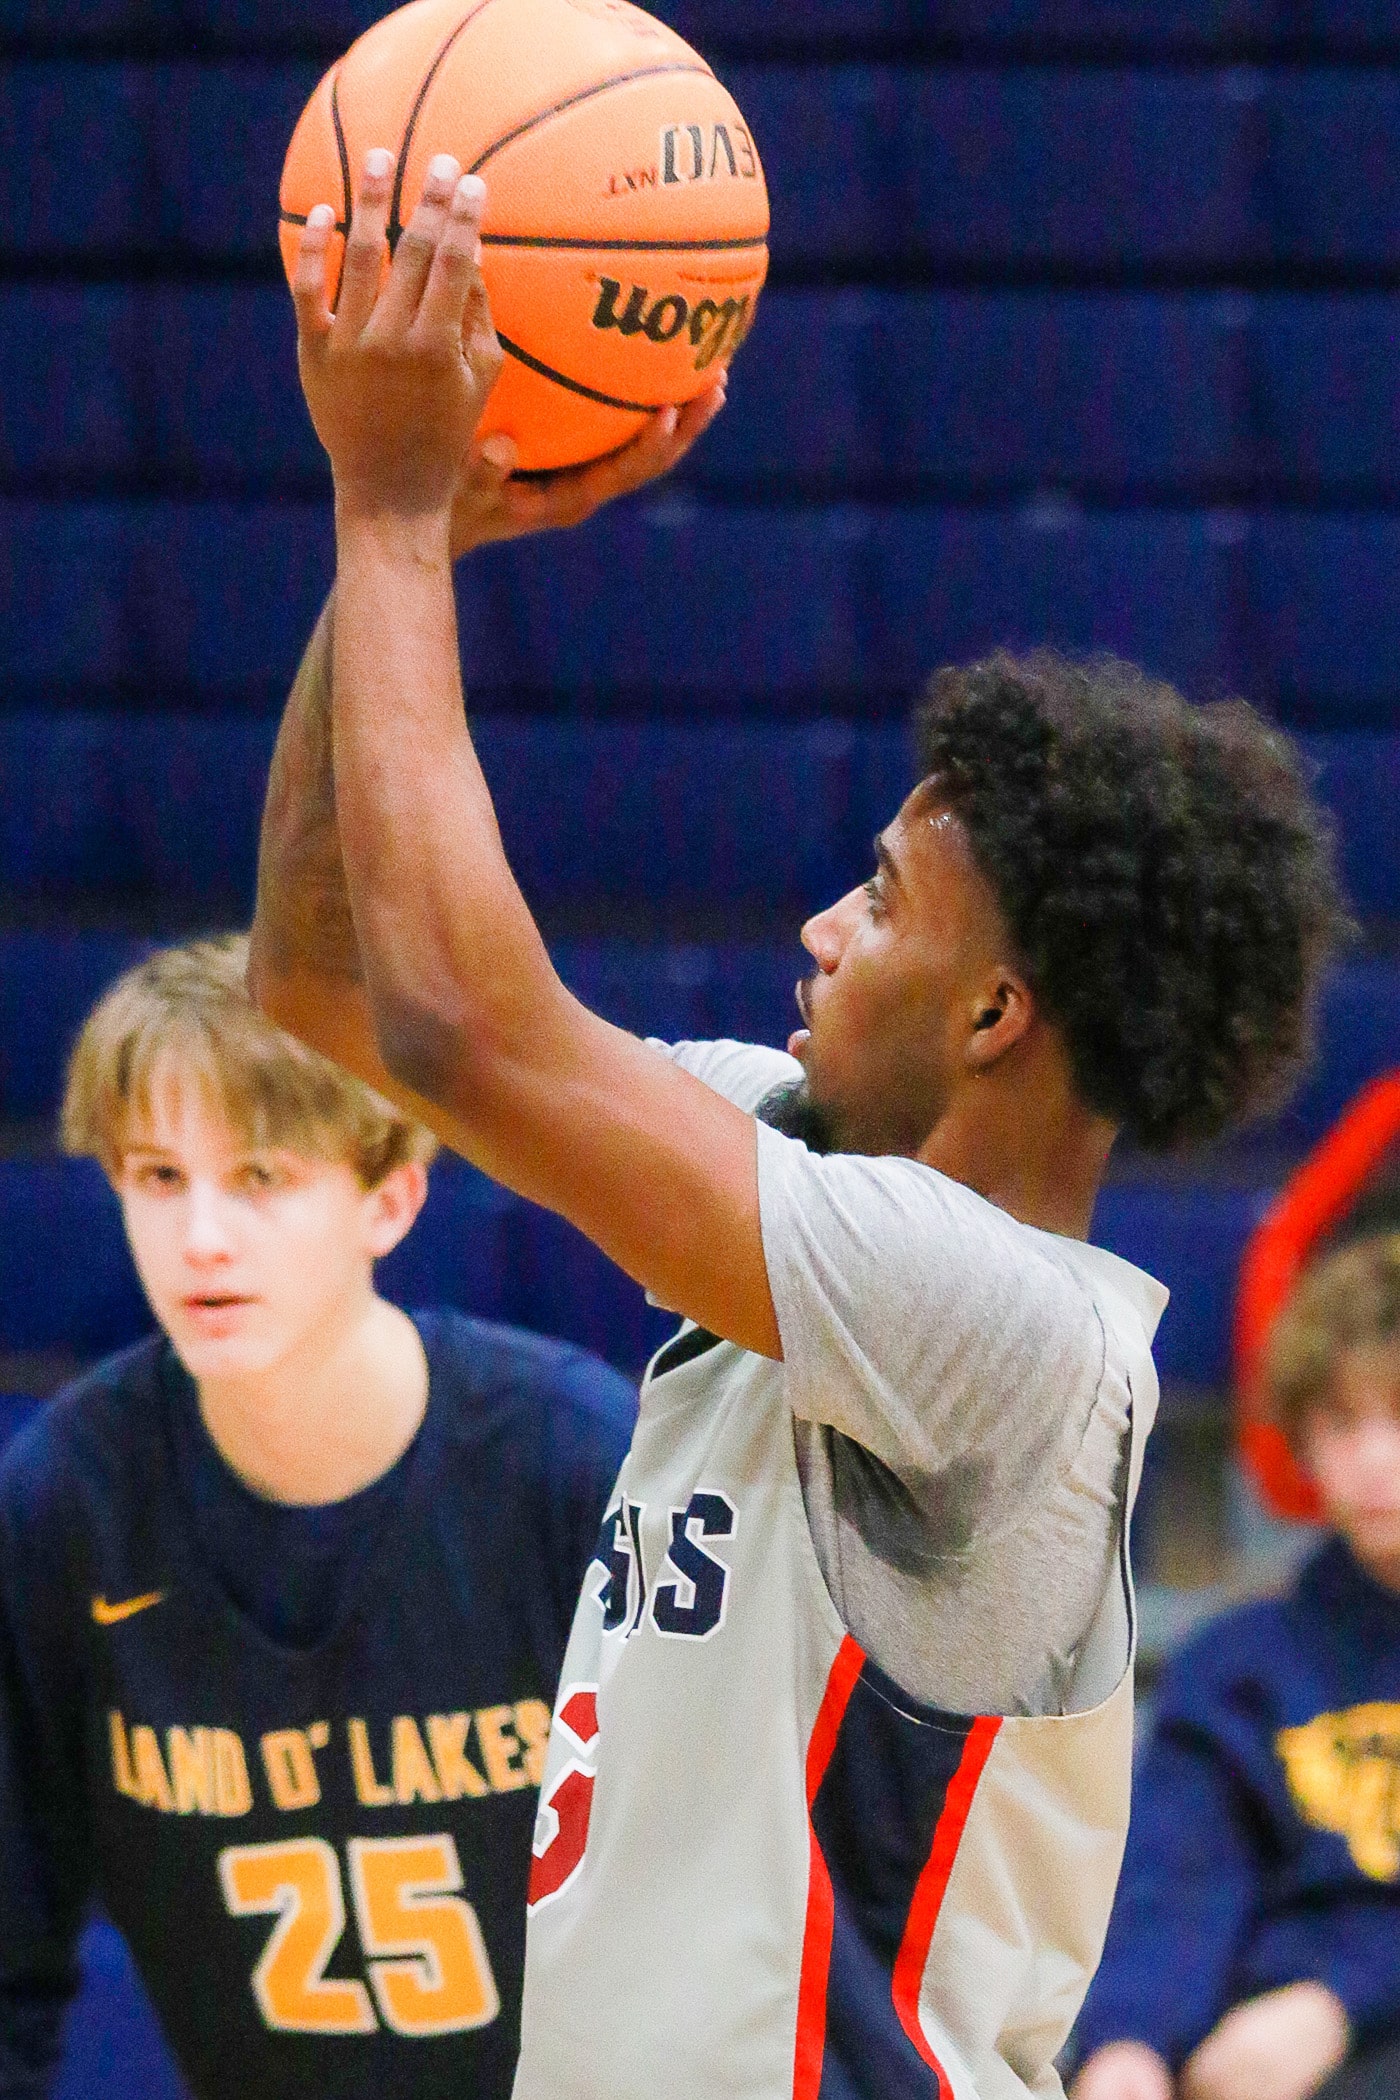 Friday evening 12/23/22 at Springstead Boys Basketball Greg O'Connell Holiday Shootout, Eagles #3 Tyree Davis setsup to shoot his penalty shot. Photo by Cheryl Clanton.